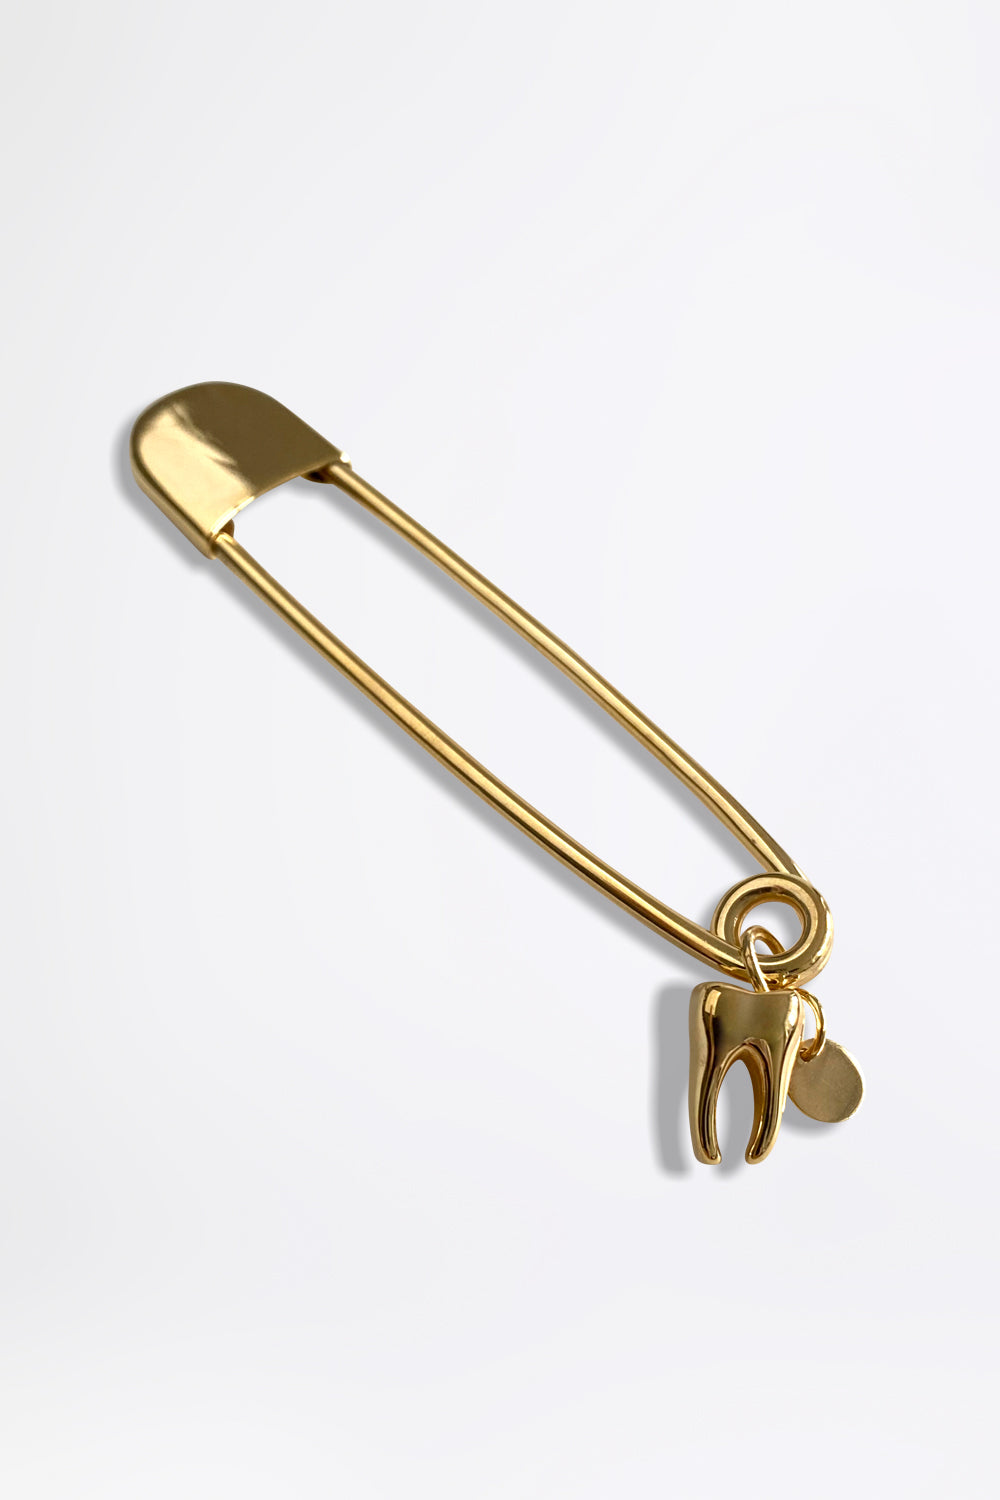 TOOTH - Gold Safety pin